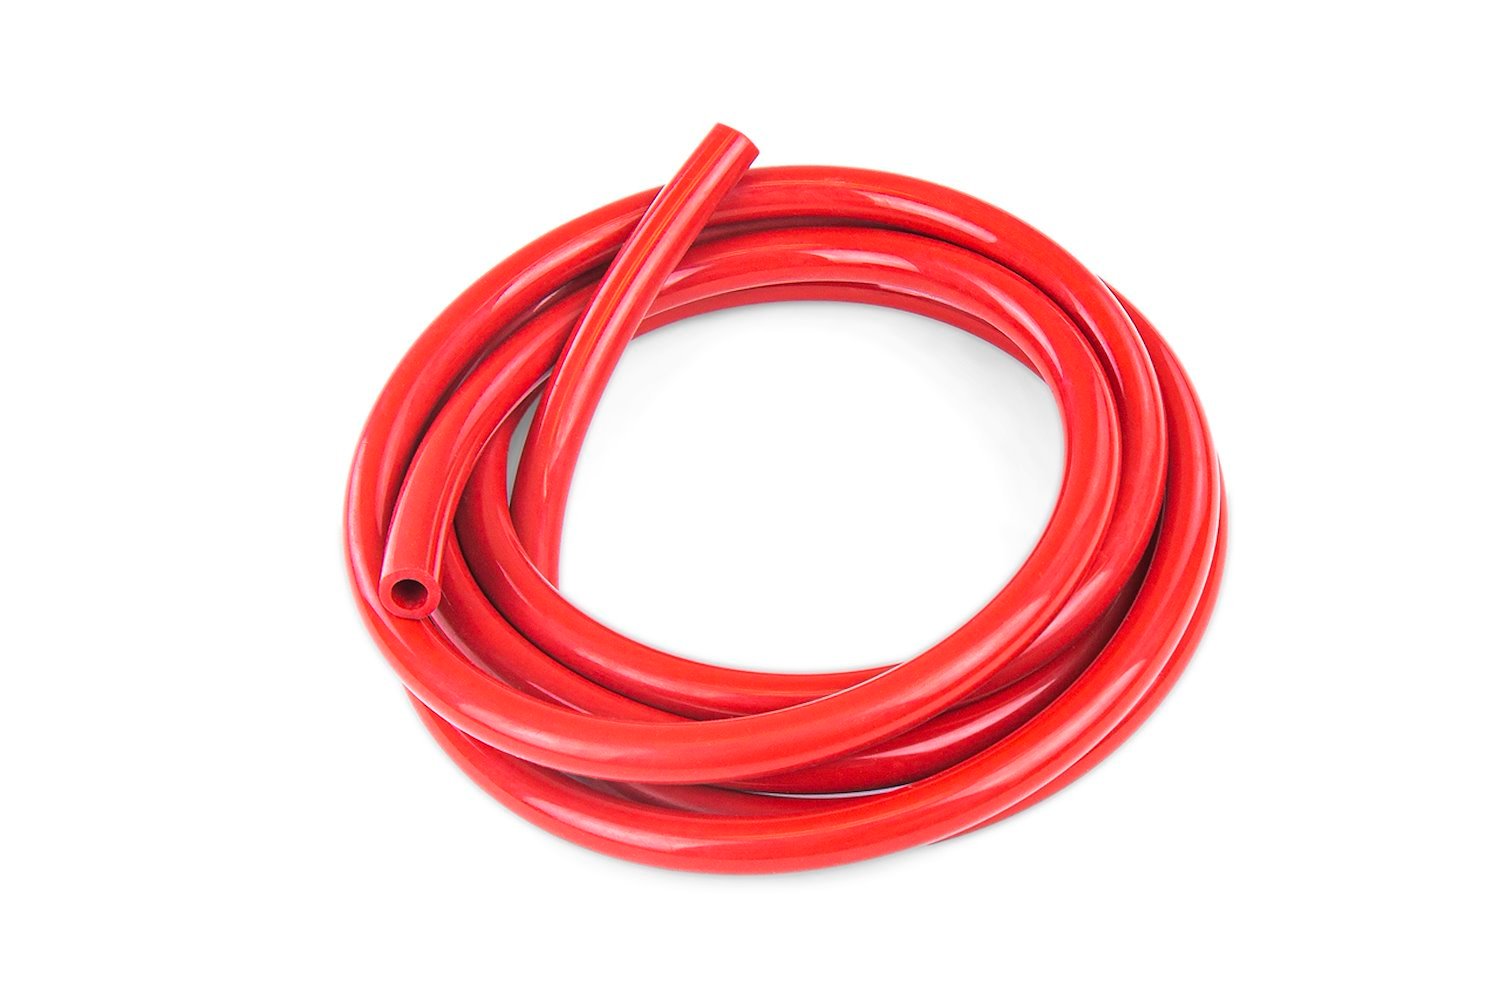 HTSVH10-REDx10 High-Temperature Silicone Vacuum Hose Tubing, 10 mm ID, 10 ft. Roll, Red